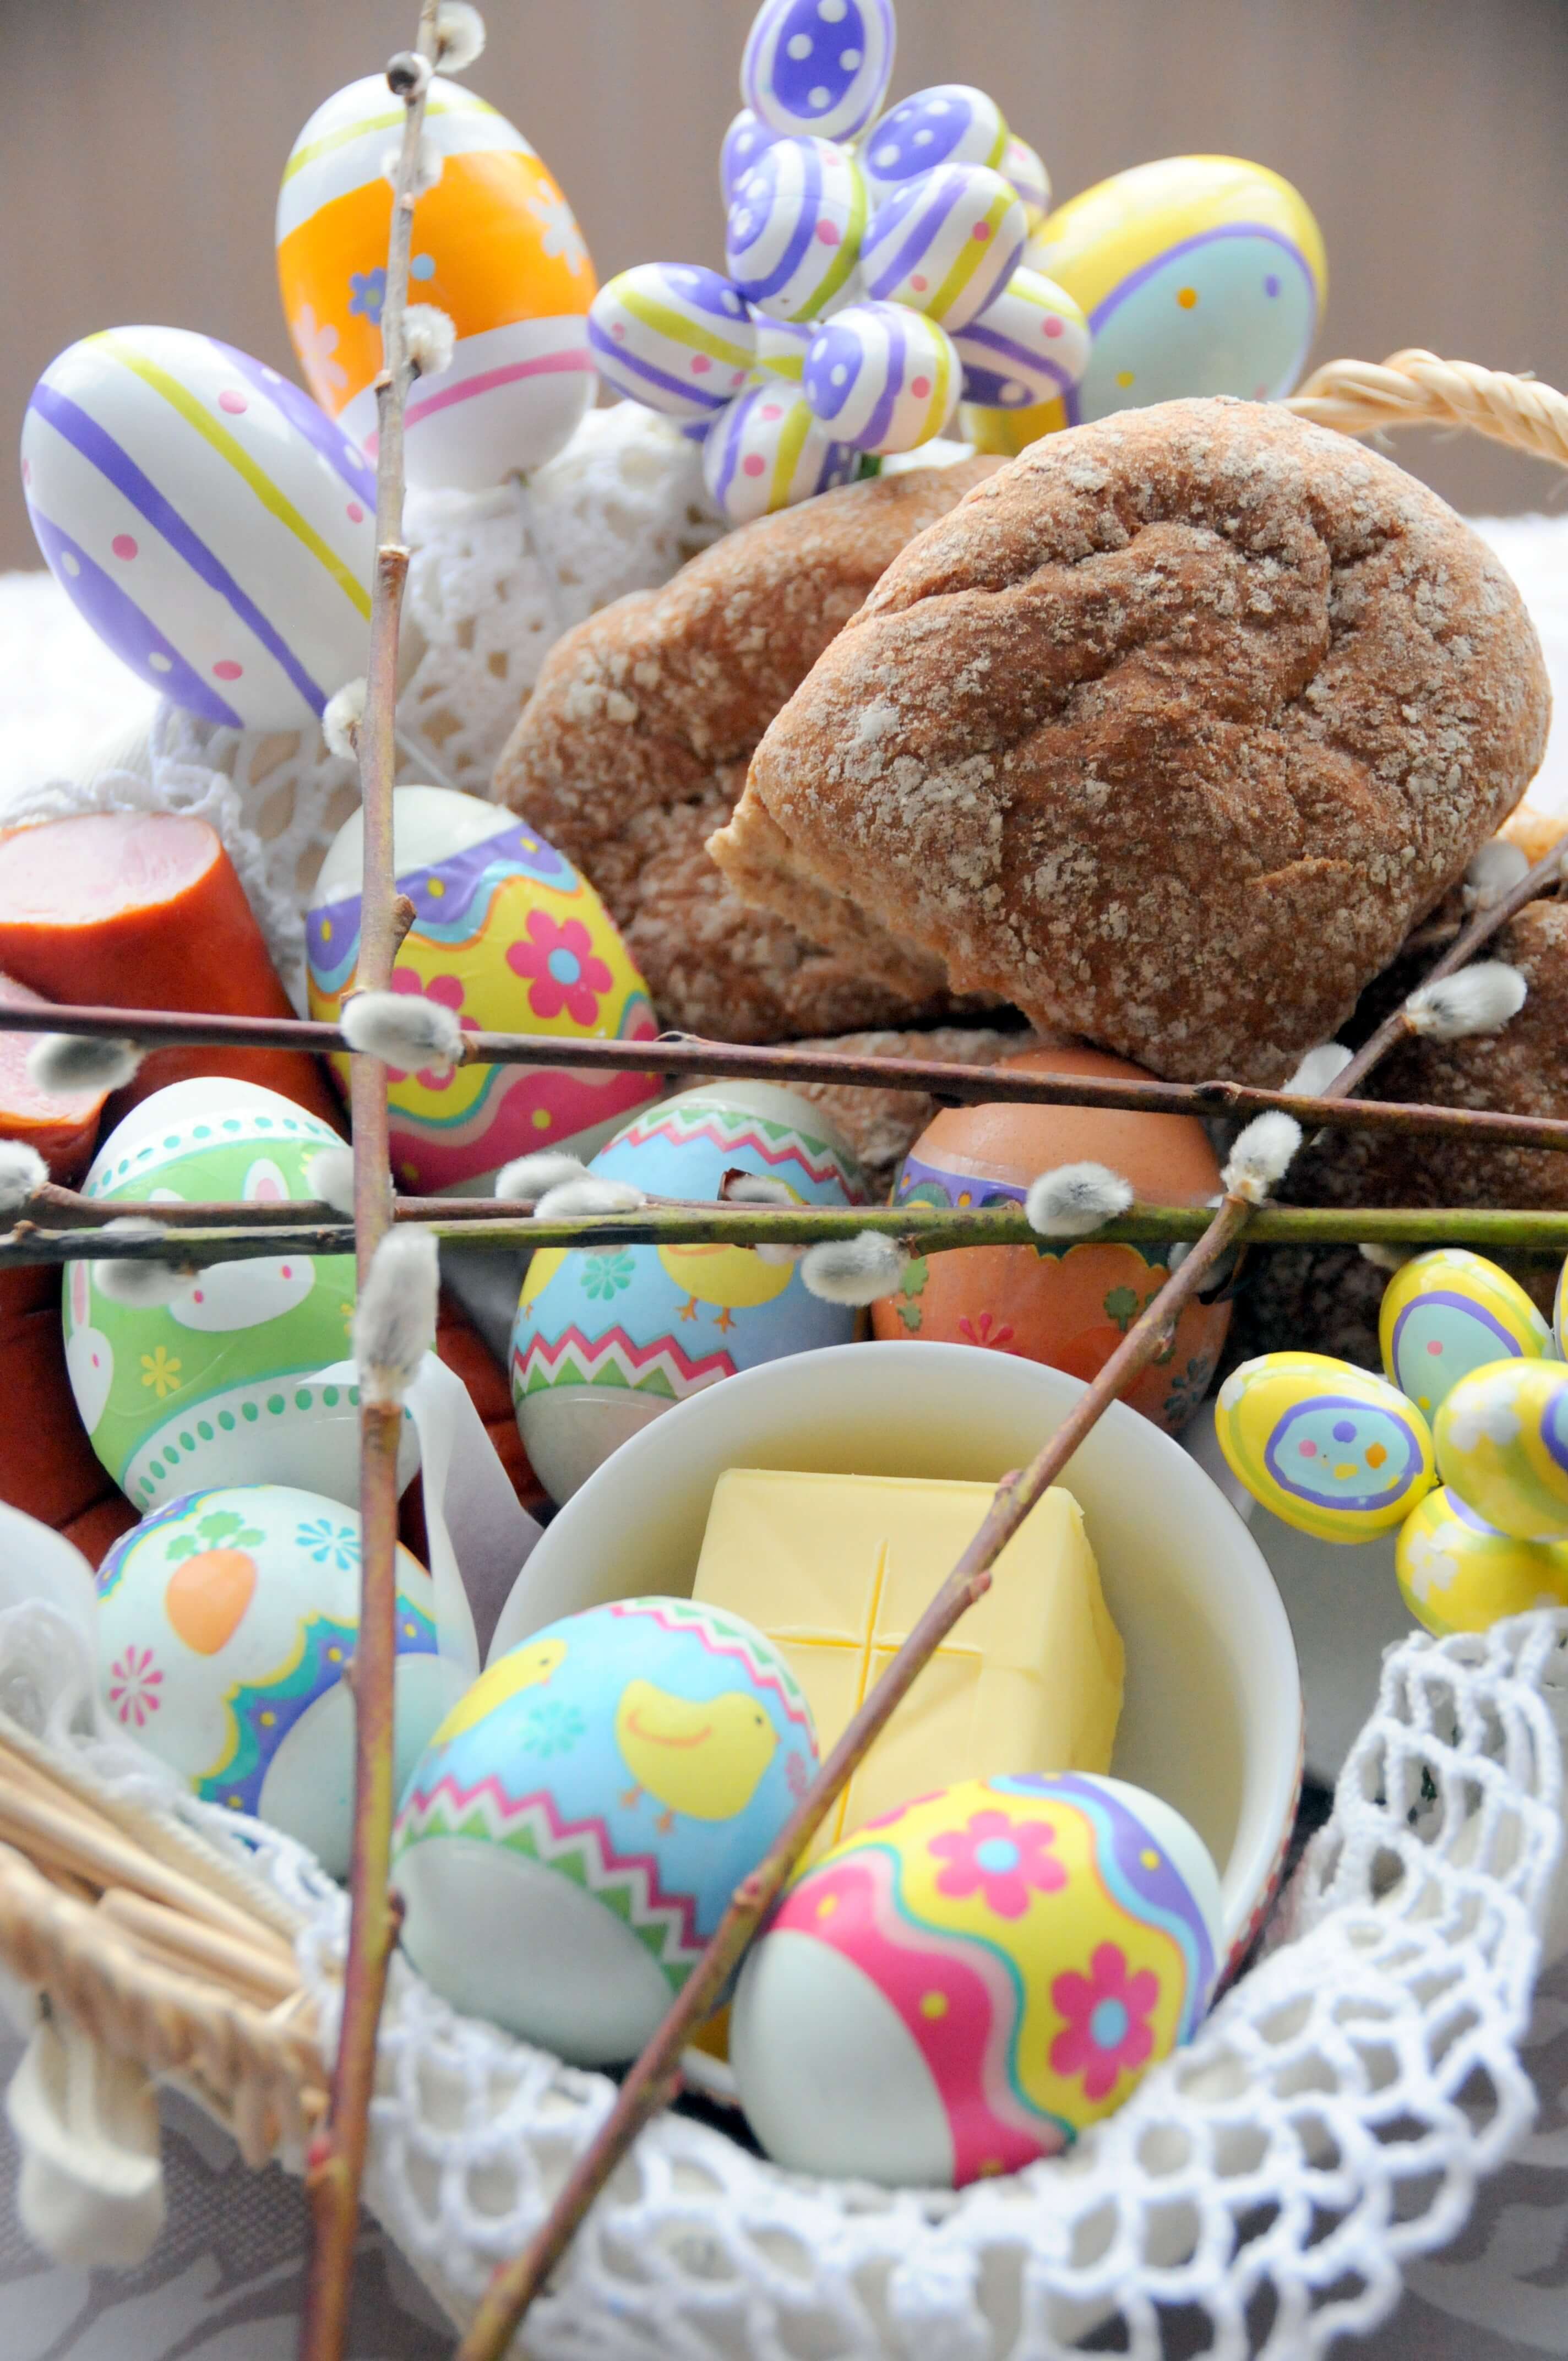 Happy Easter from Fabulicious Food!